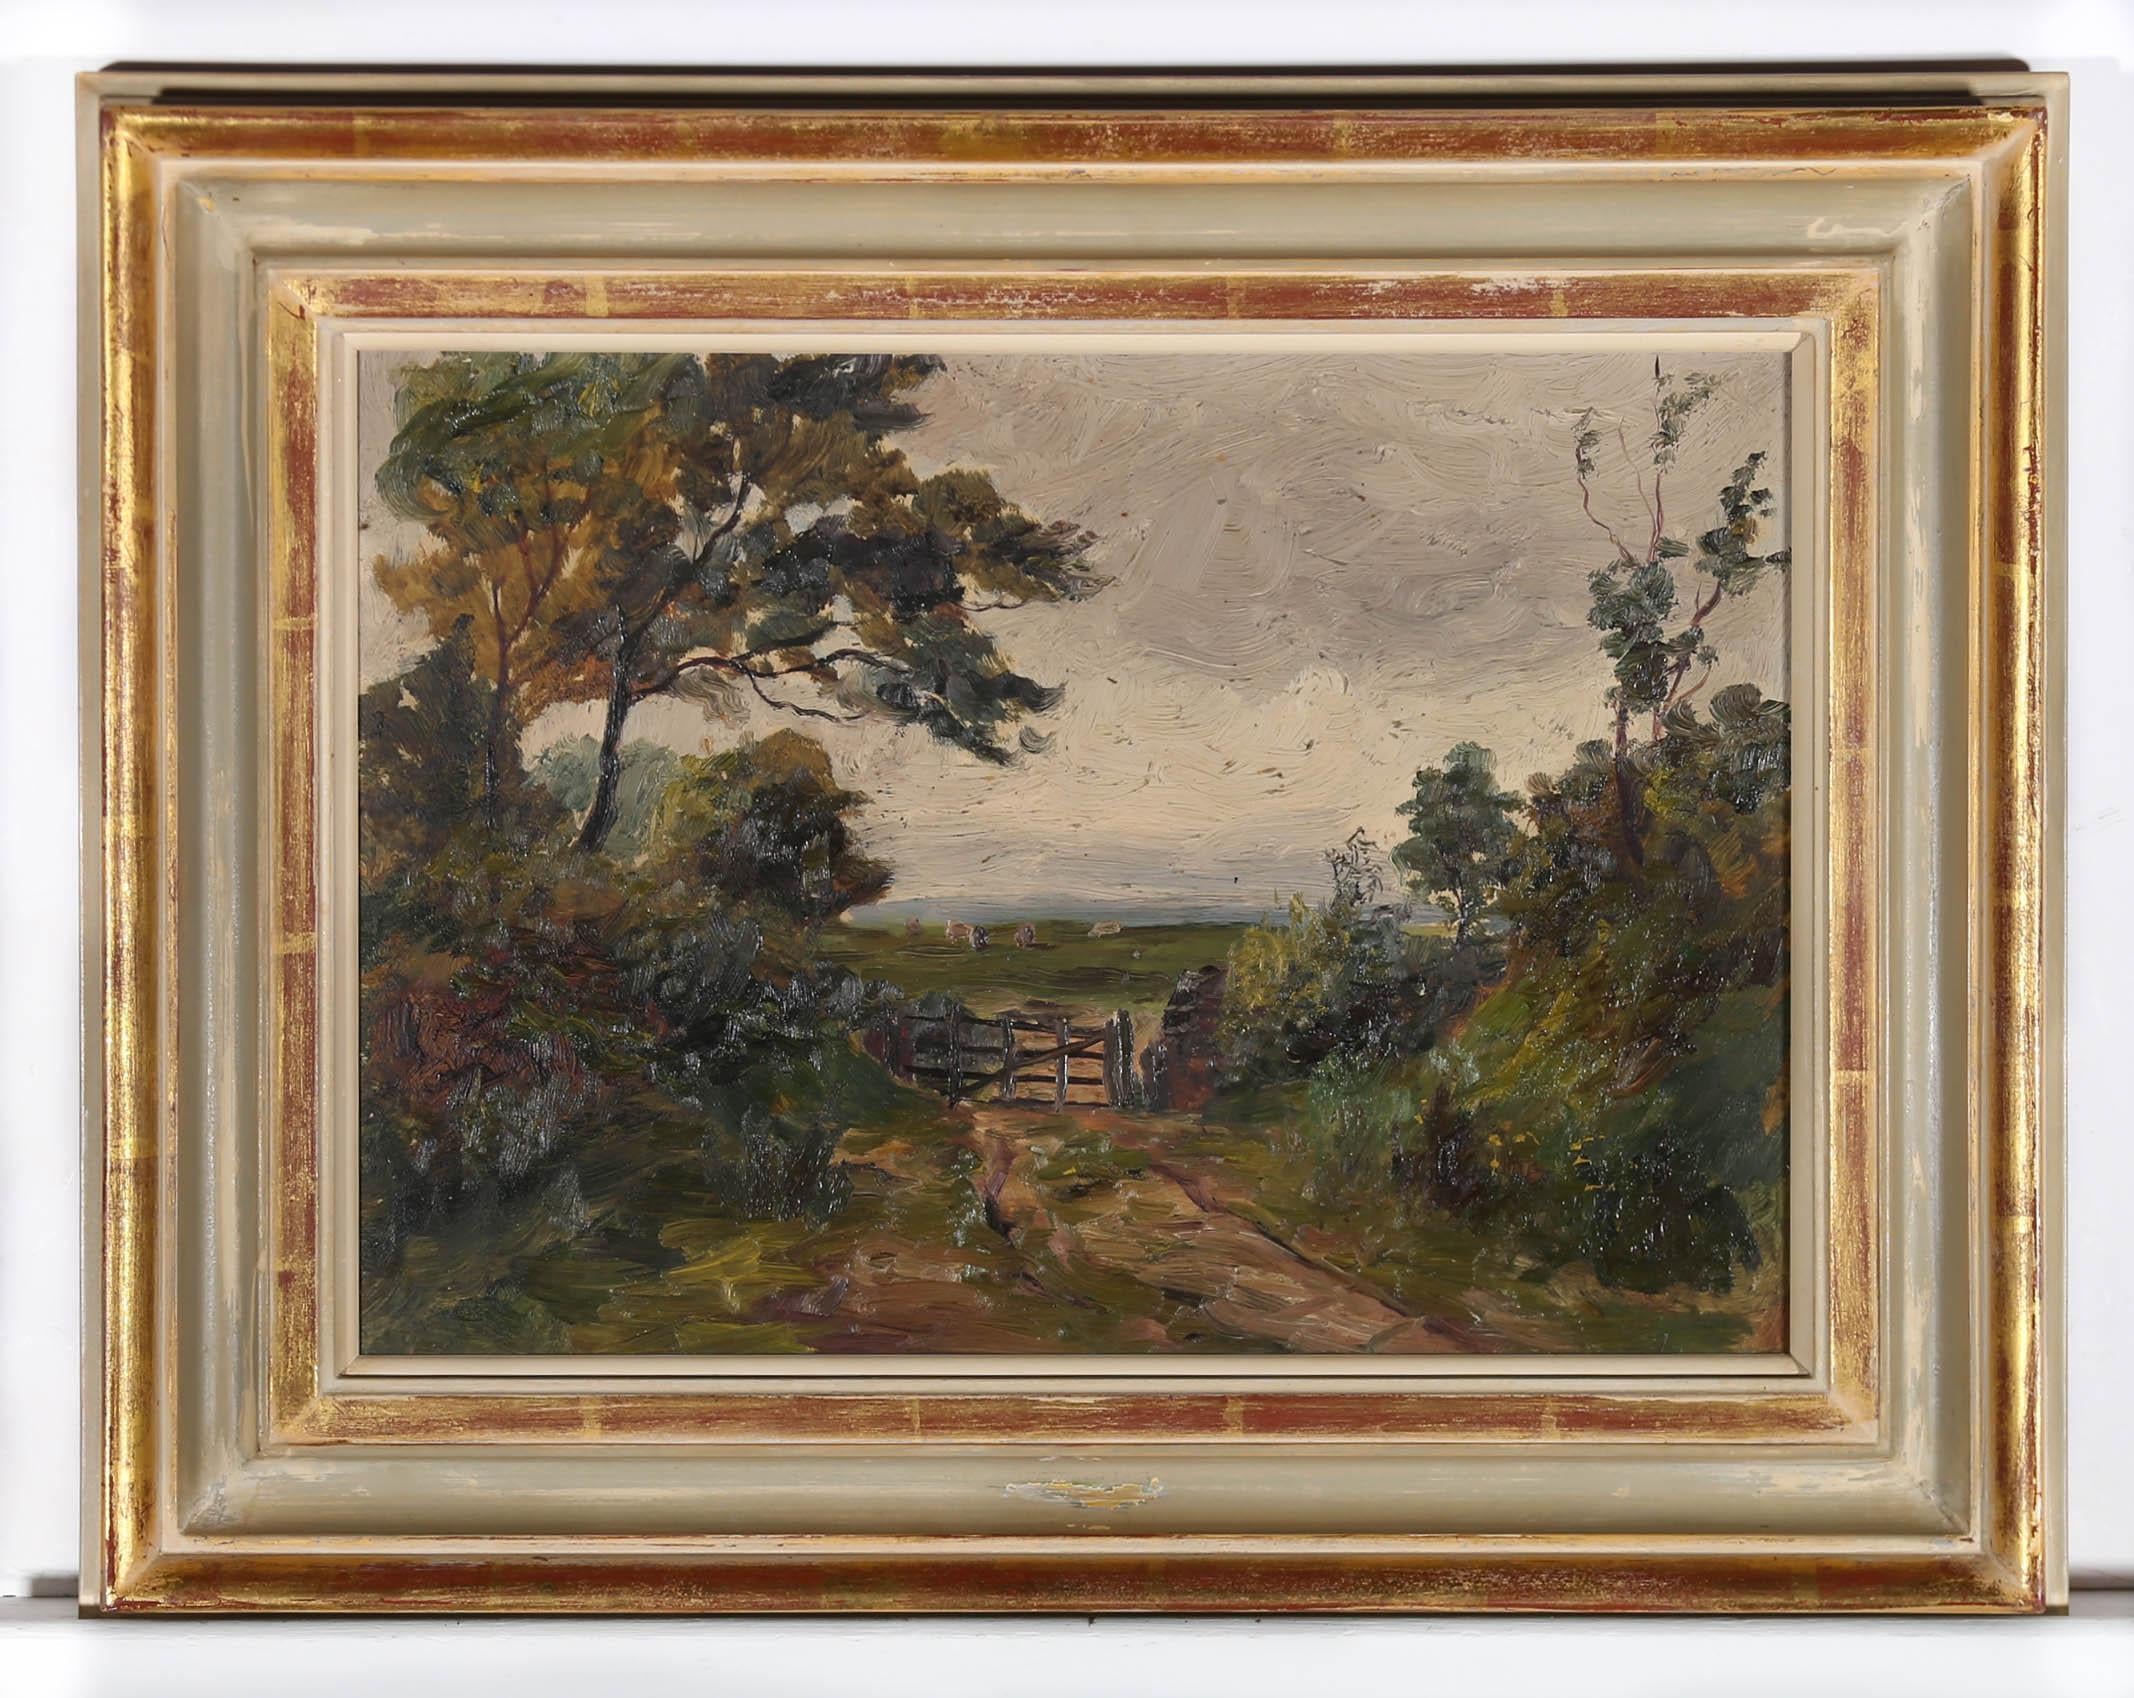 An original mid century oil by the late John Robert Exley (1890-1979), depicting a weathered pathway leading to a gated field with grazing livestock. Beautifully presented in contemporary sage and gilt frame. Fix to the reverse of the painting is a